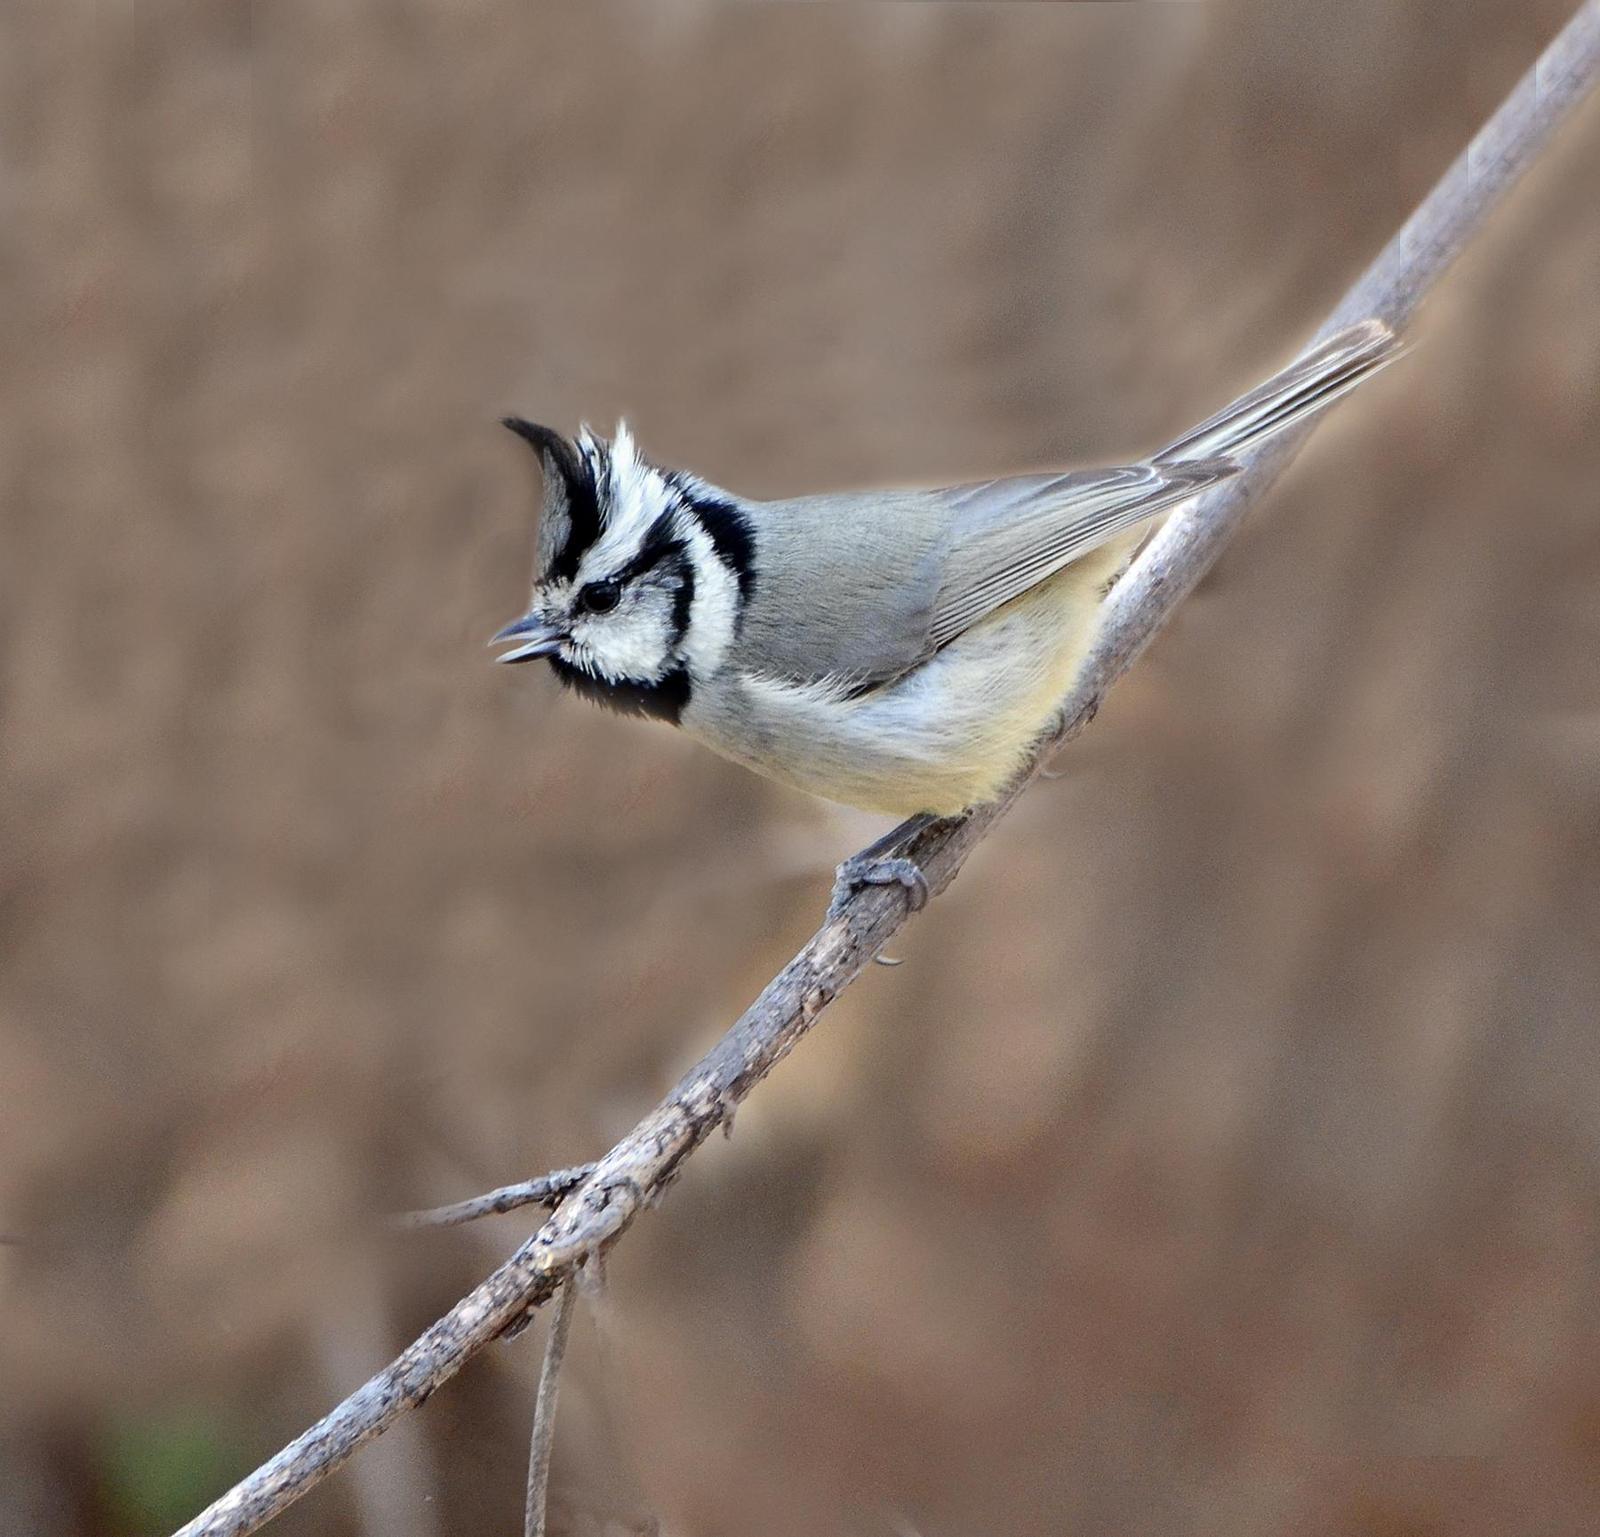 Bridled Titmouse Photo by Steven Mlodinow